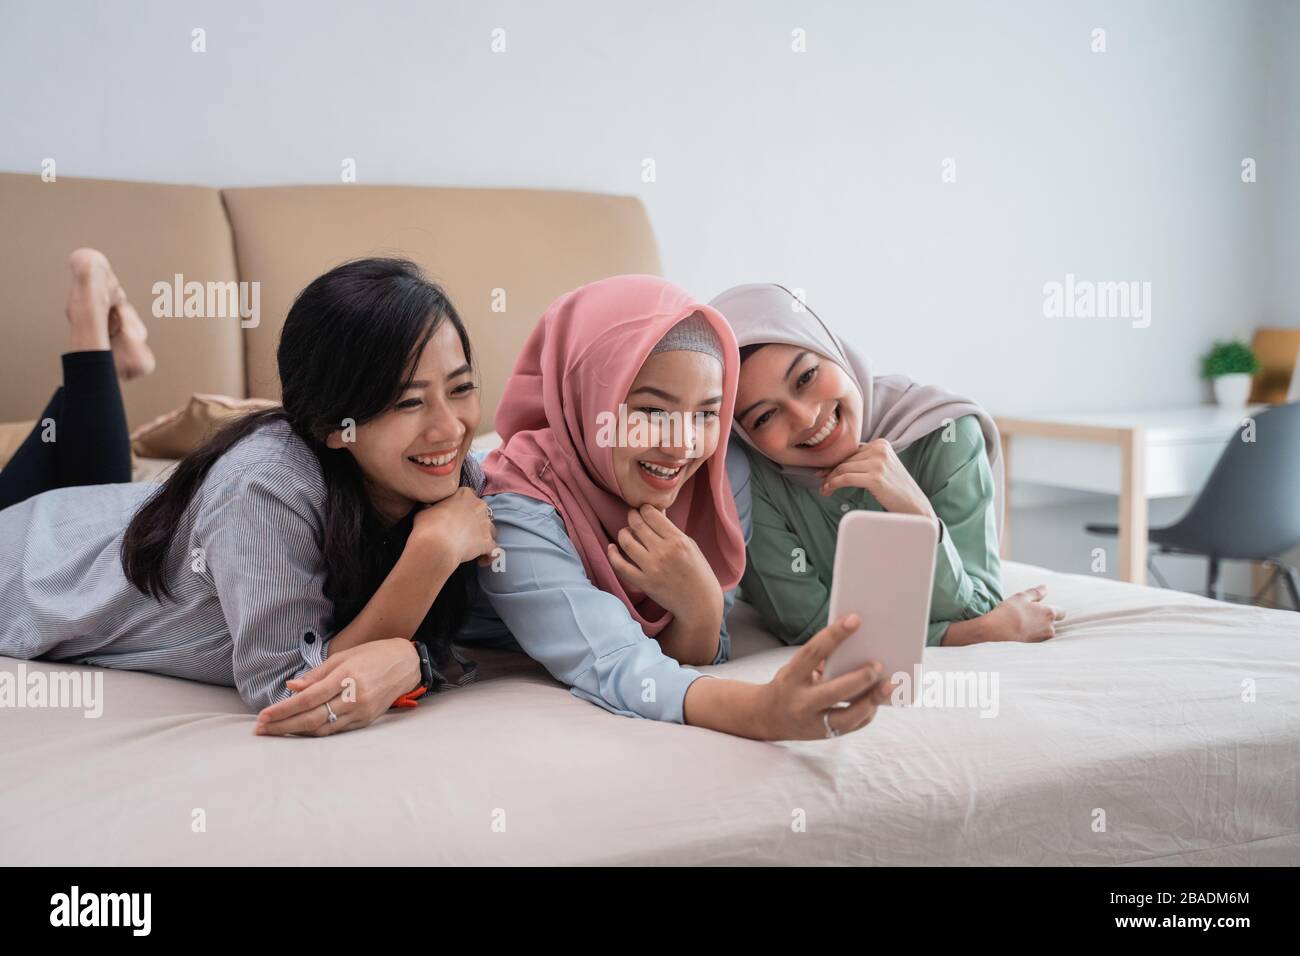 three Muslim women lying in bed while doing video calls using a smartphone while enjoying a relaxing time Stock Photo